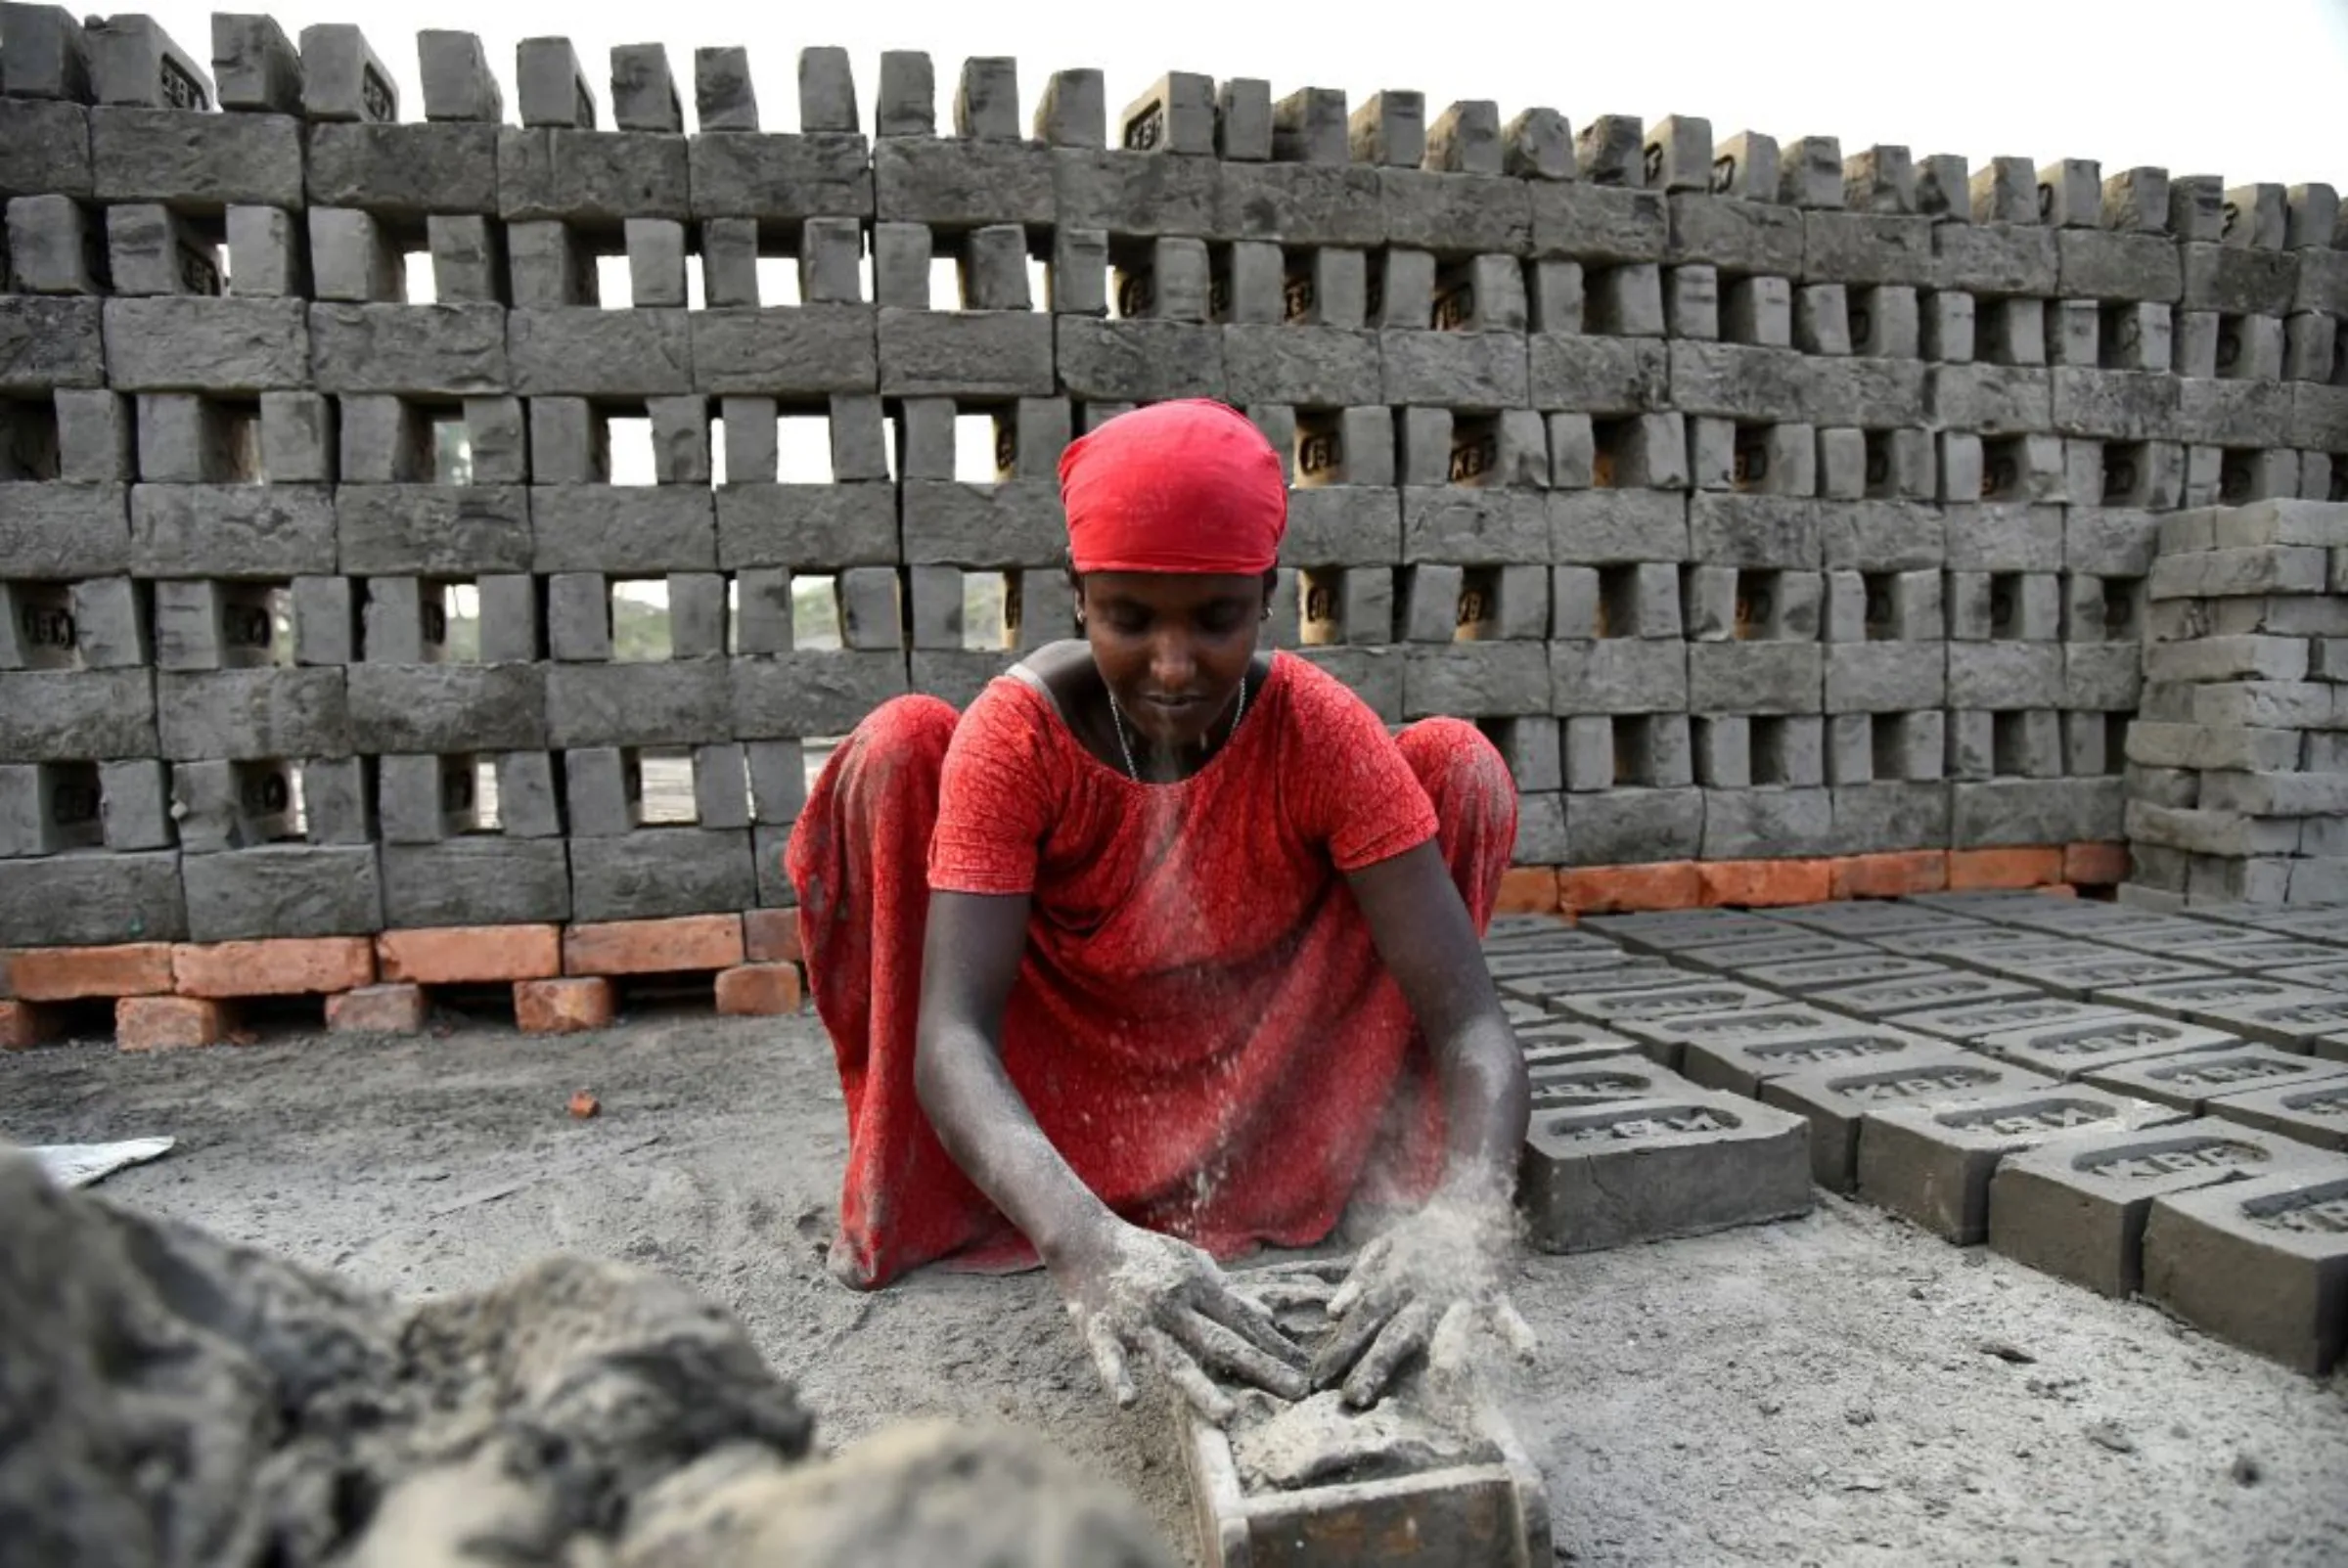 A labourer makes bricks in a kiln at Langolpota village in North 24 Parganas district in the eastern state of West Bengal, India, November 26, 2019